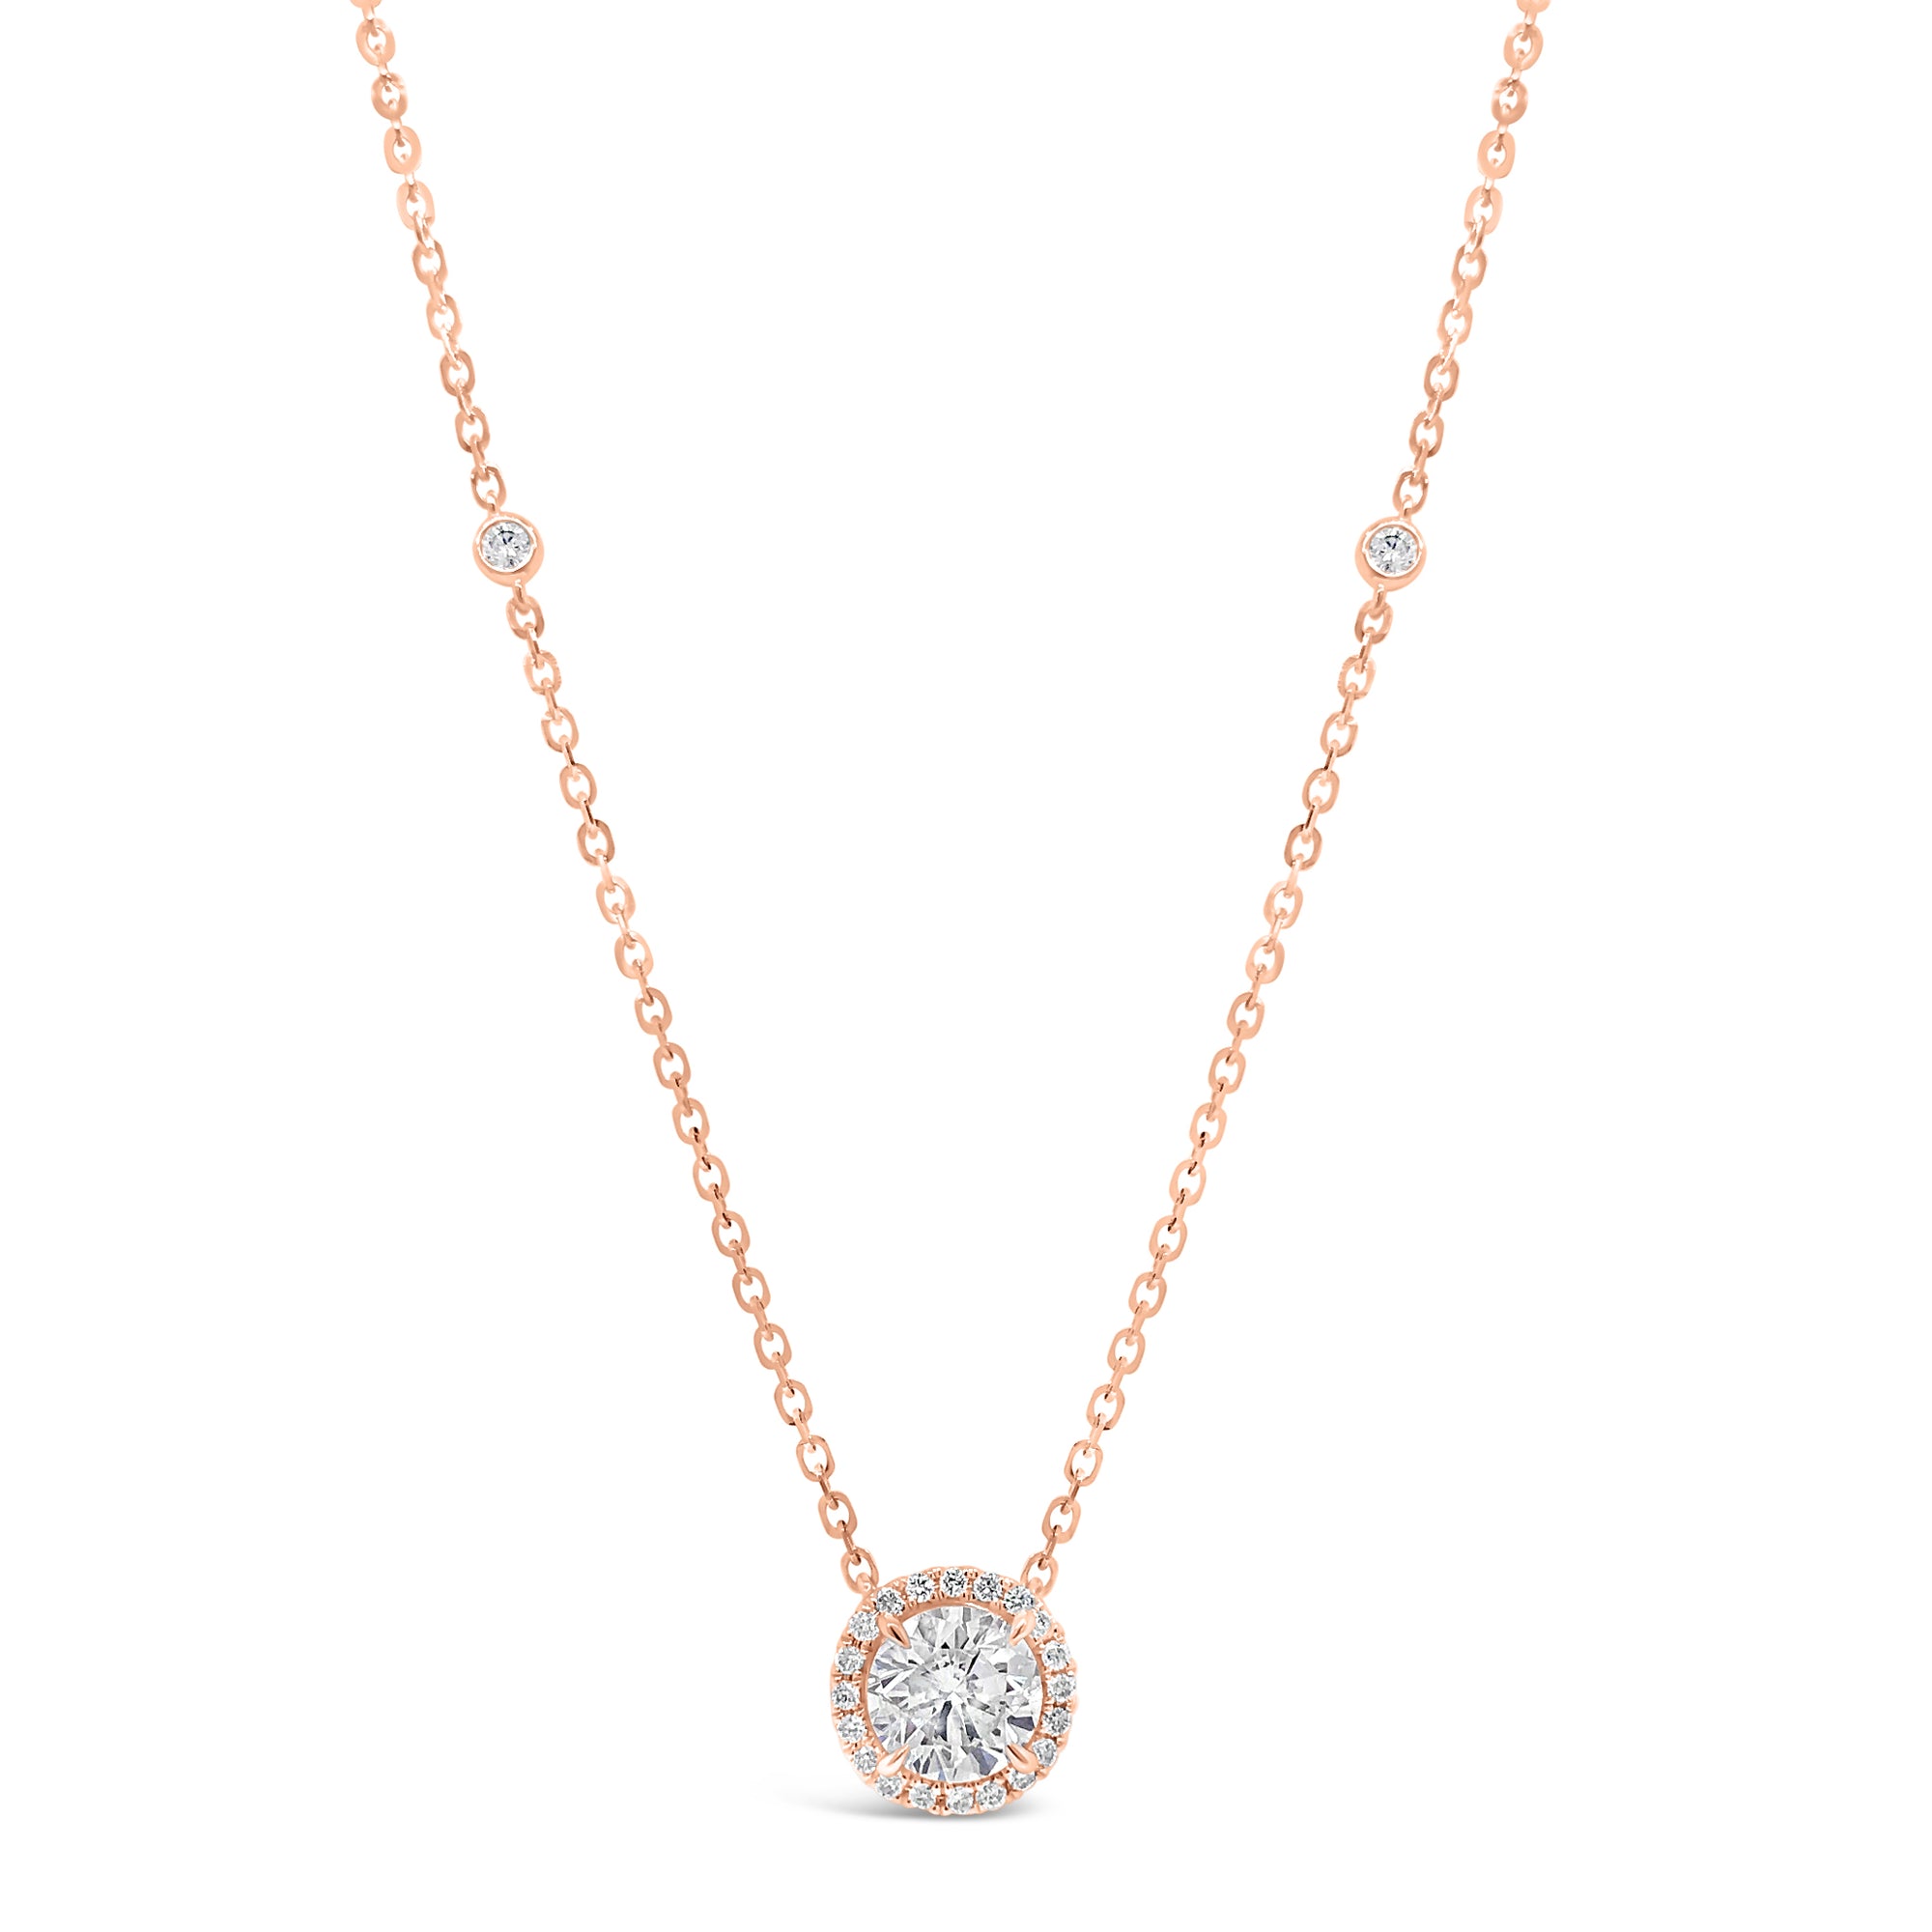 Round Diamond Halo Pendant Necklace with Bezel Set Diamond Stations - 1.01 ct diamond (GIA-graded I color, I2 clarity) - 0.19 ct (total weight for all other diamonds) white gold